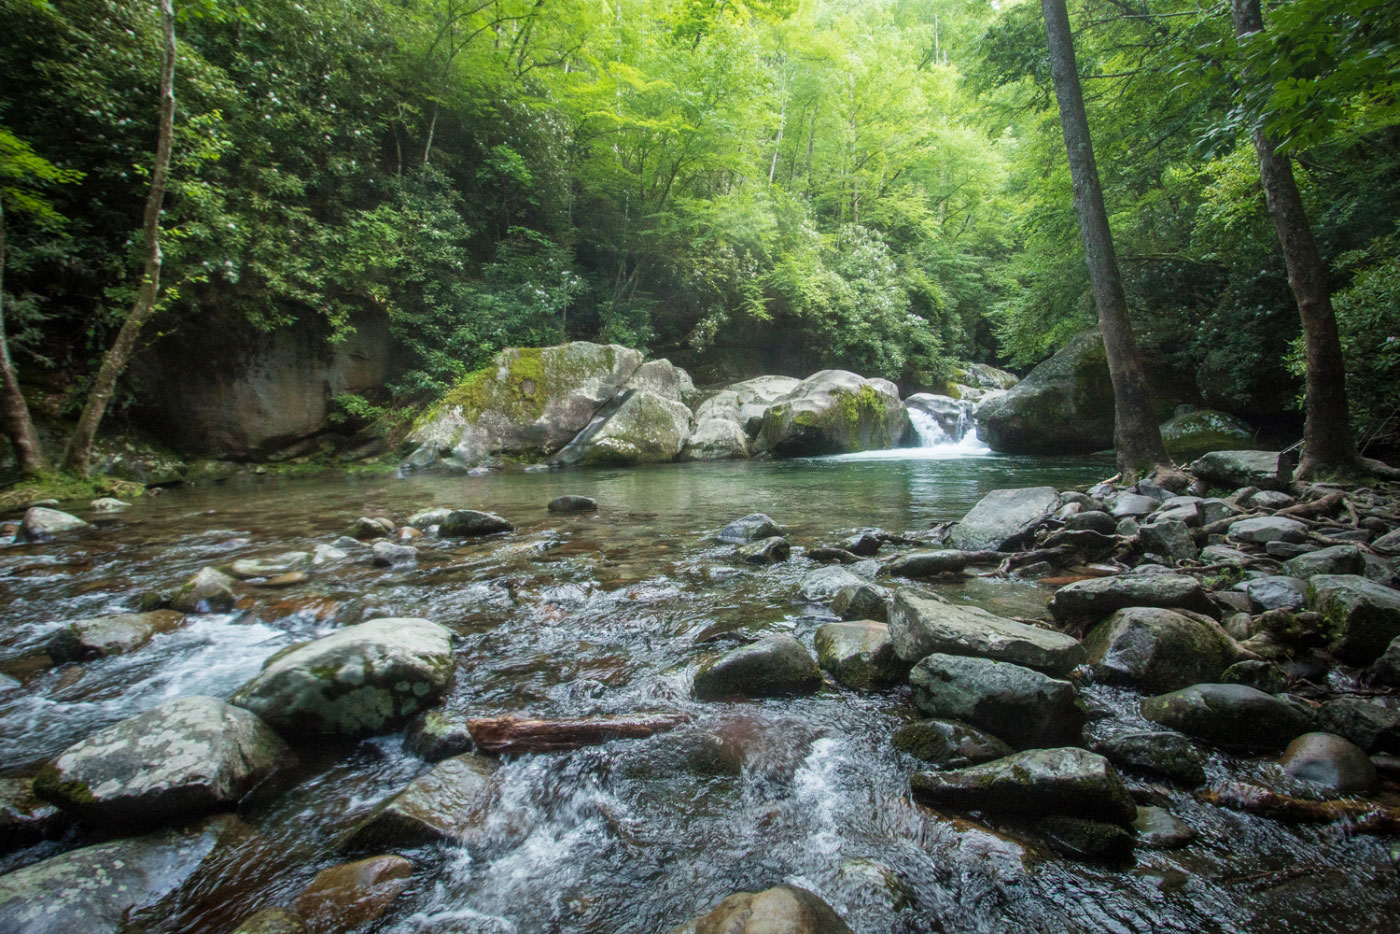 Hike Mount Cammerer via Chestnut Branch and Big Creek Loop in Great Smoky Mountains National Park, North Carolina - Stav is Lost